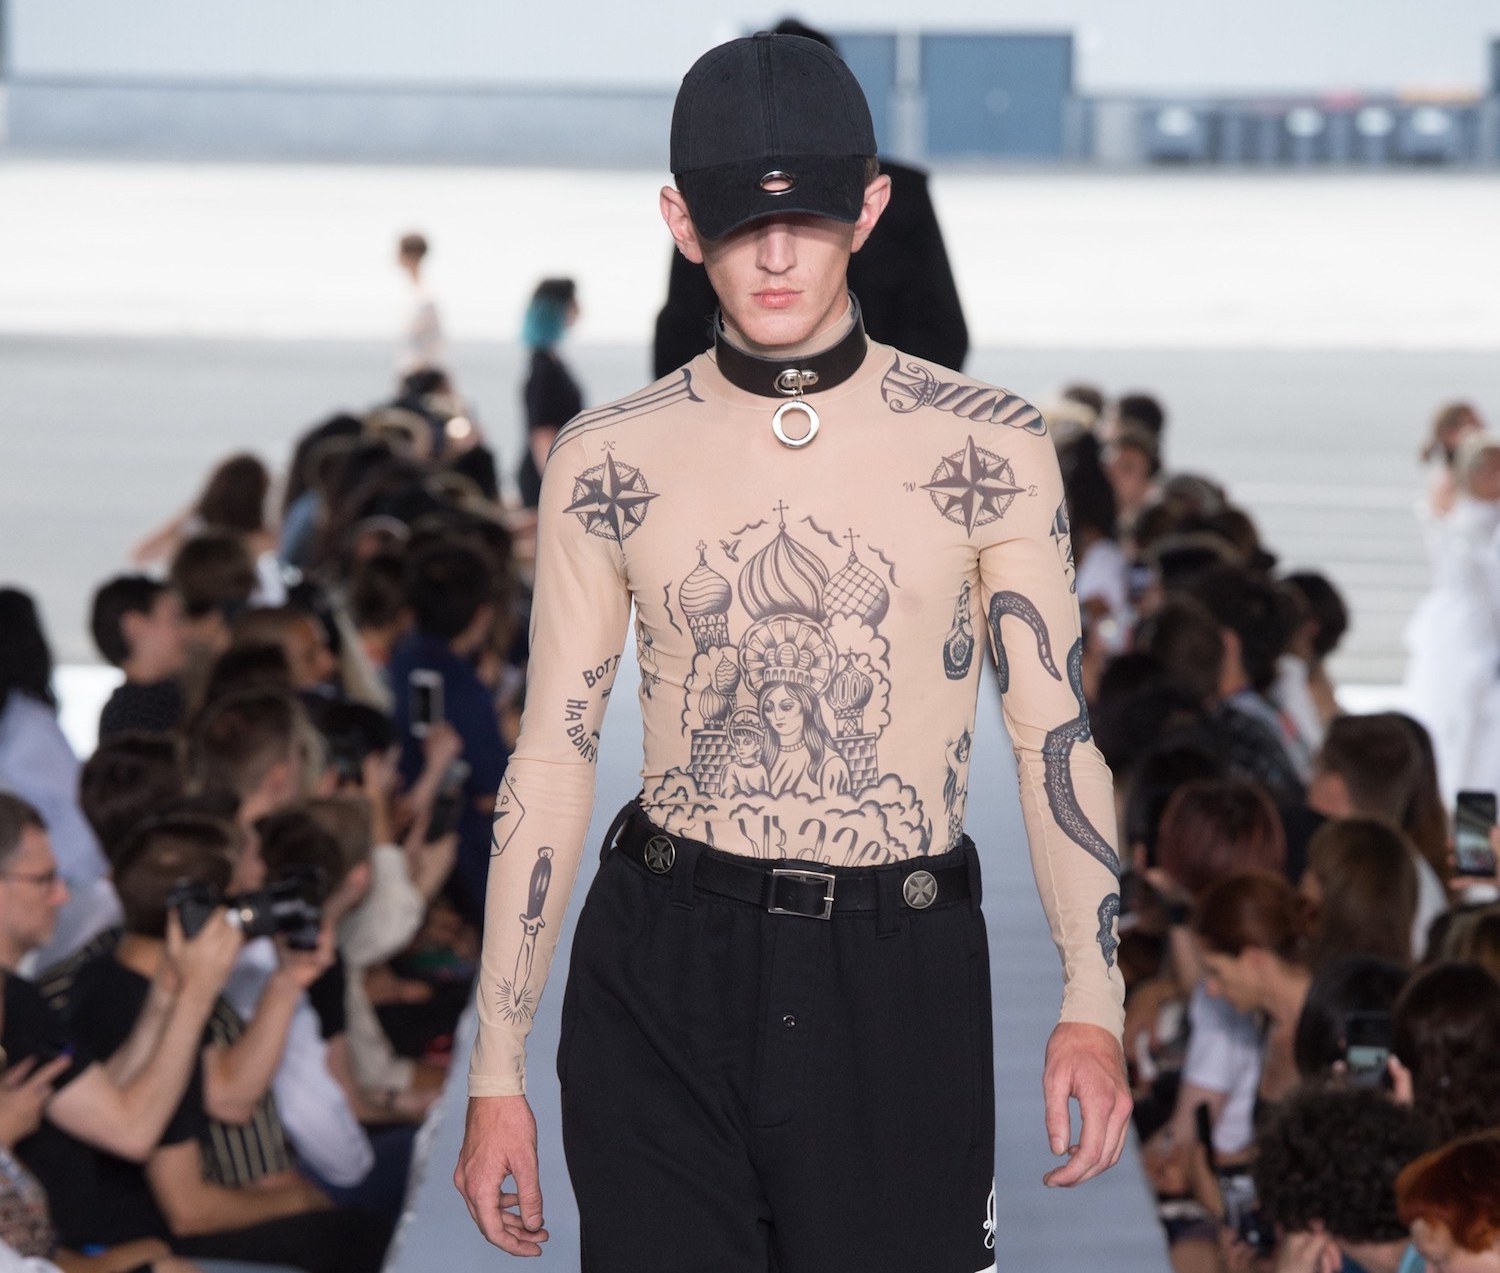 Vetements Presents “War” Inspired Spring 2019 Menswear Collection